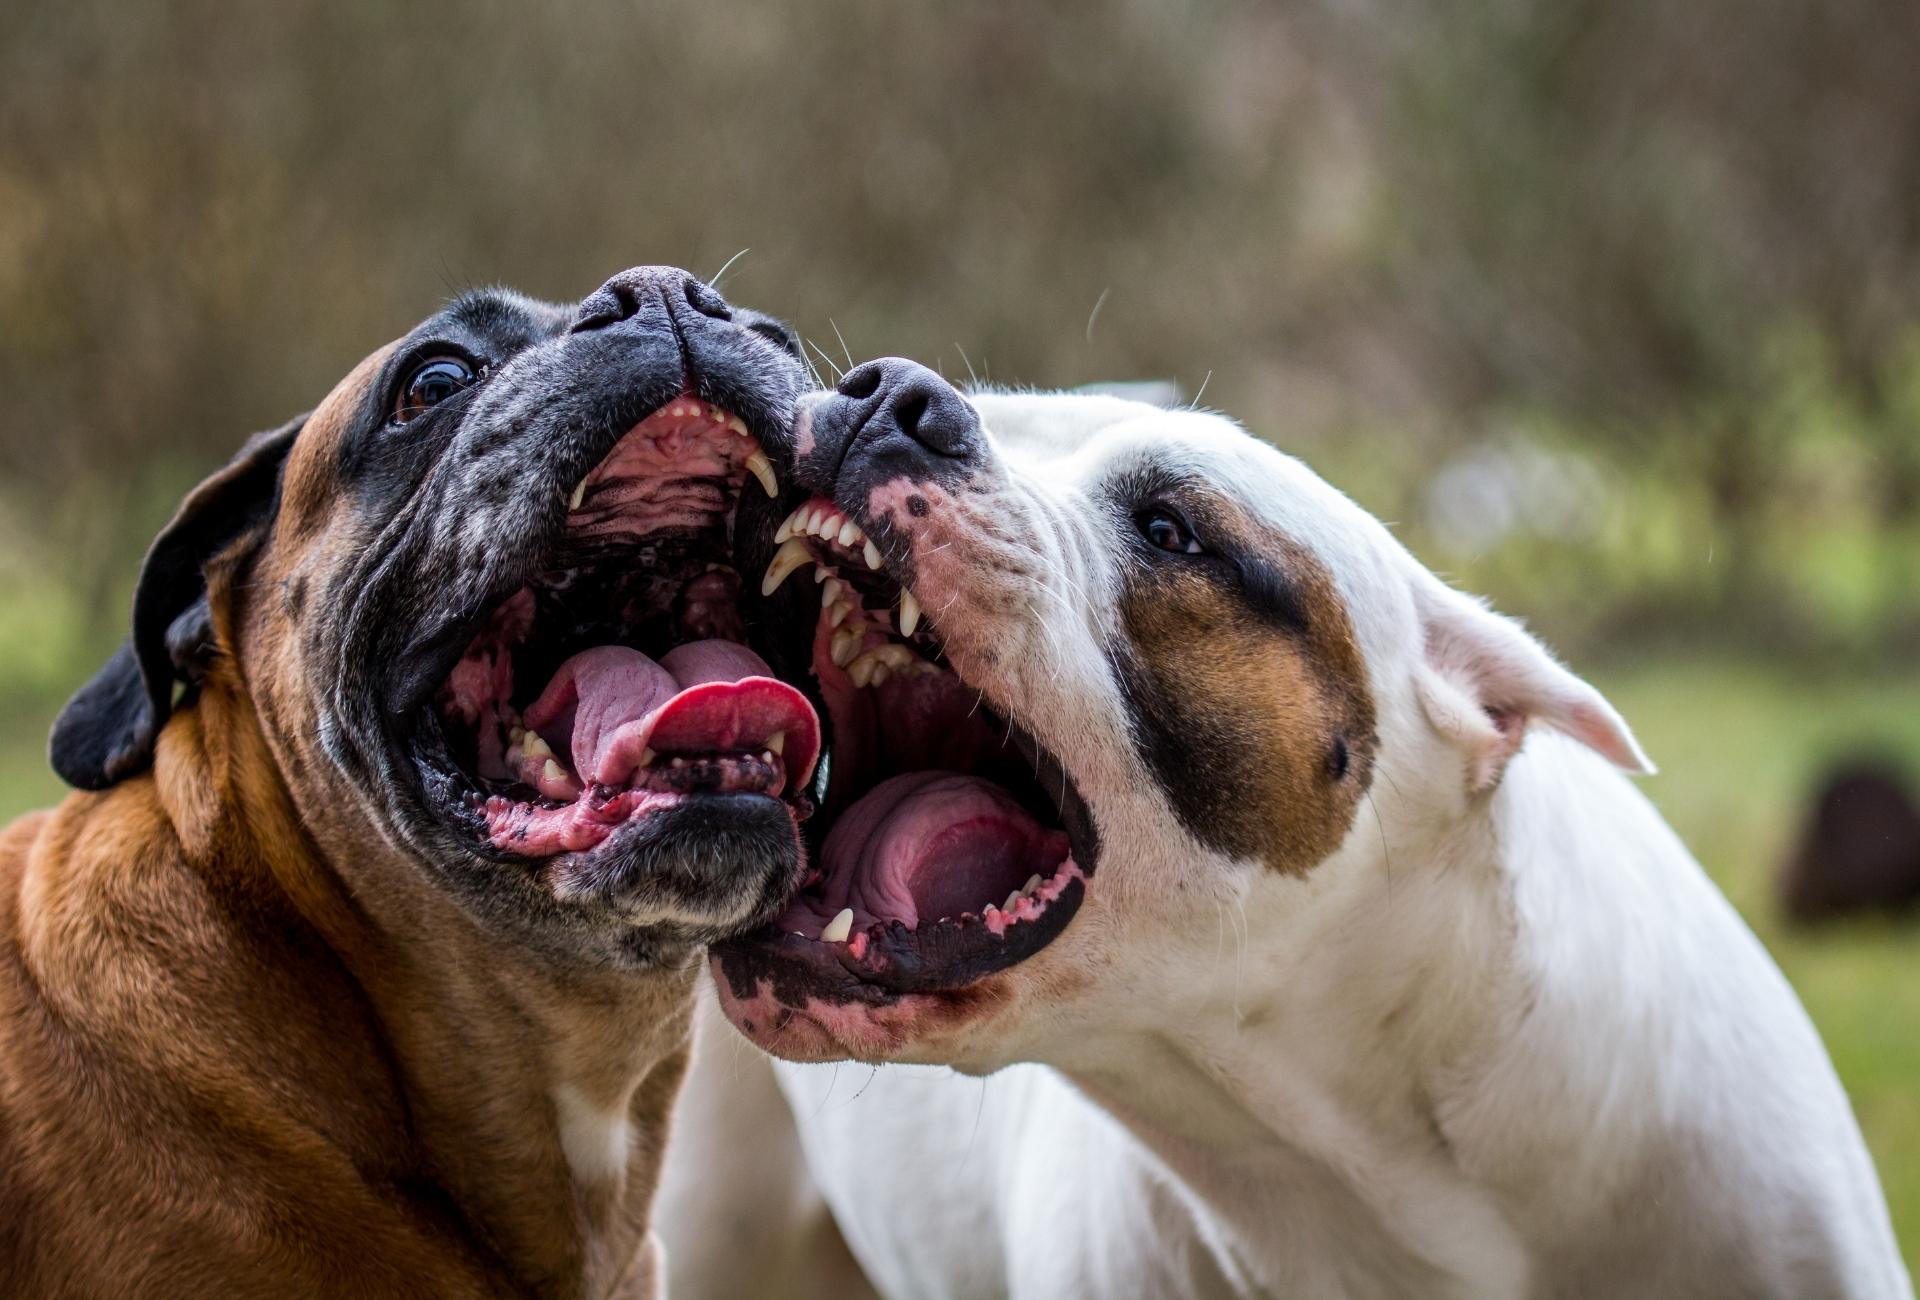 Two strong dogs with large heads biting at each other's mouth.